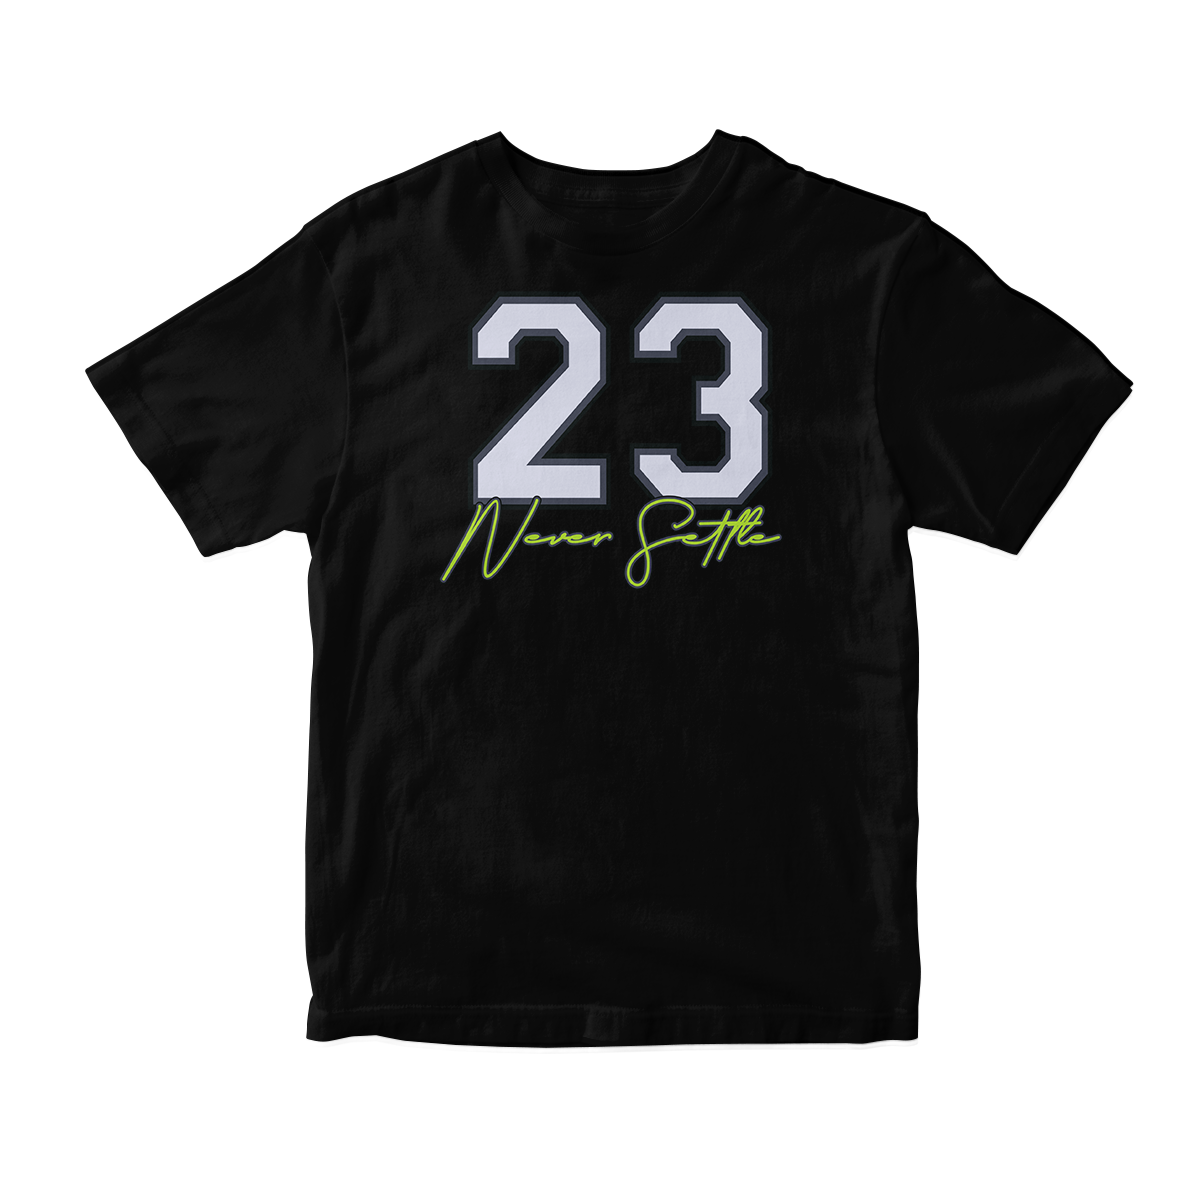 'Never Settle' in Neon 4 CW Short Sleeve Tee